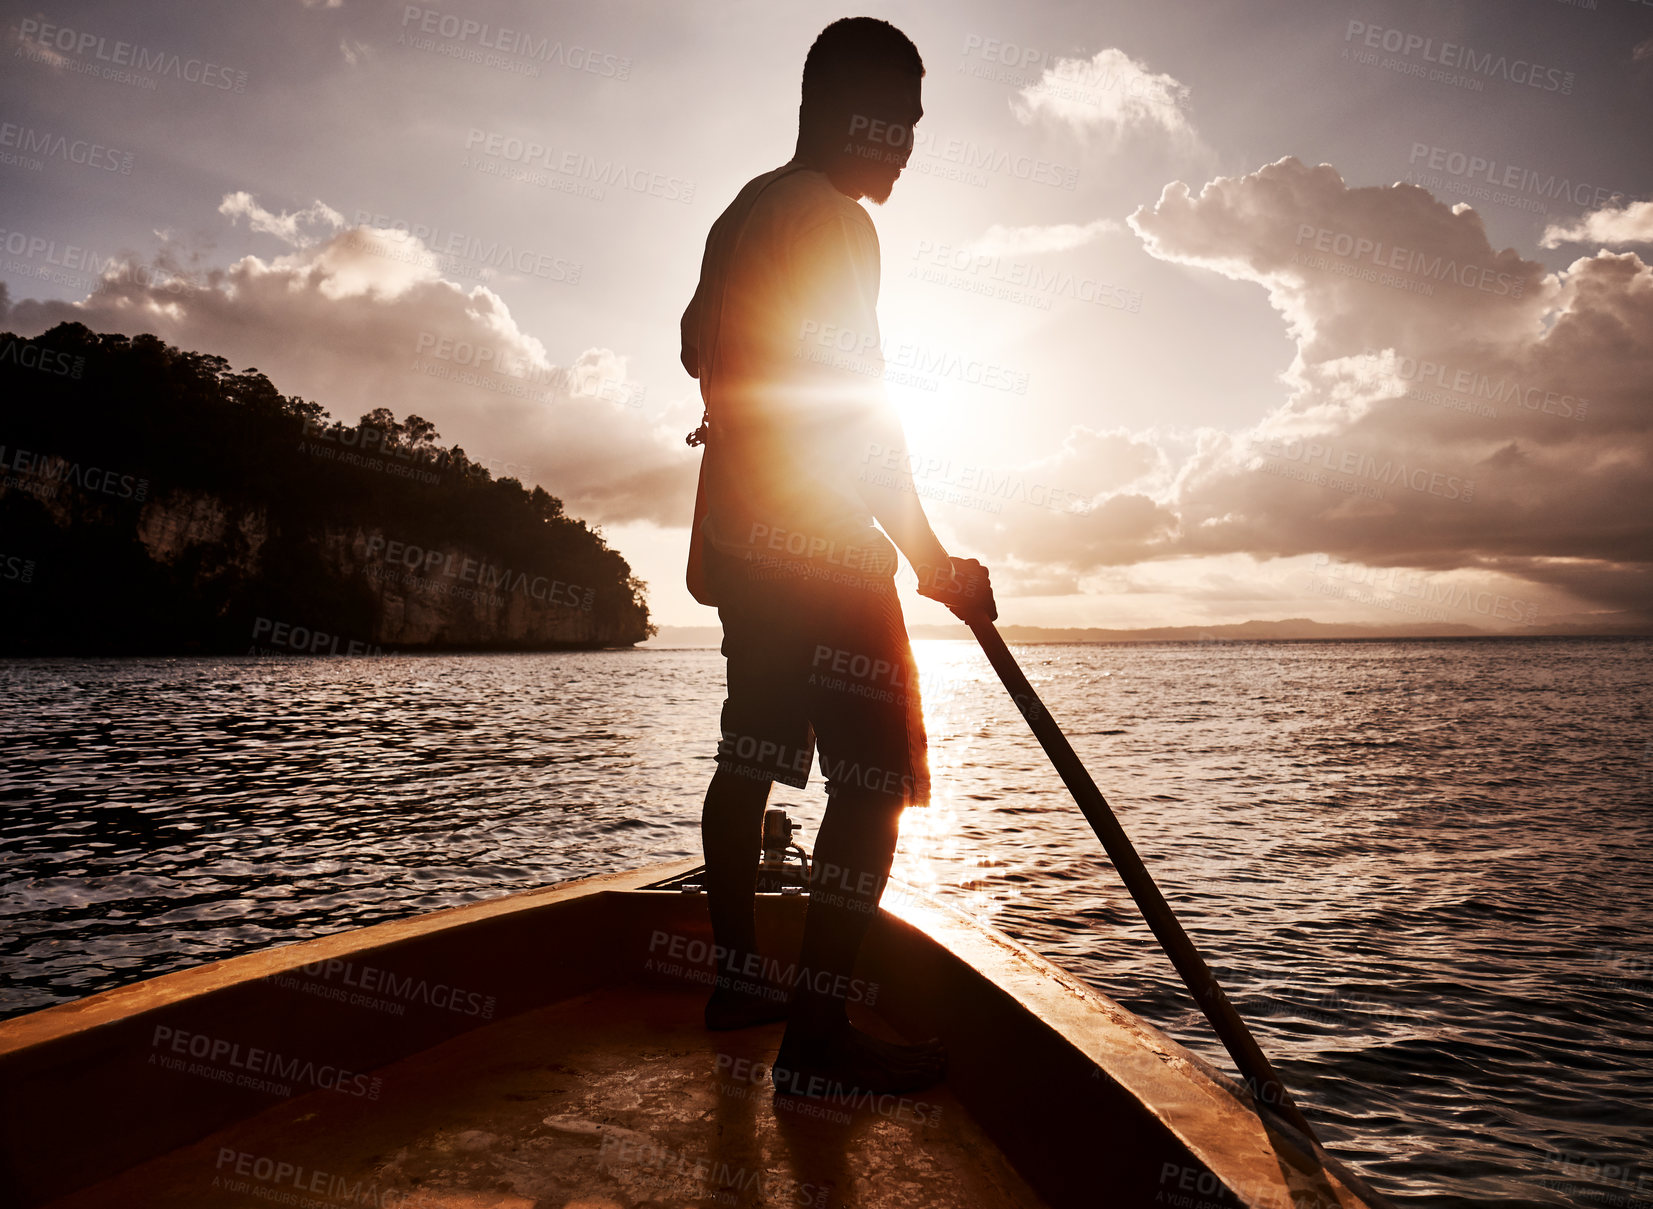 Buy stock photo Shot of a young man rowing a boat along the sea